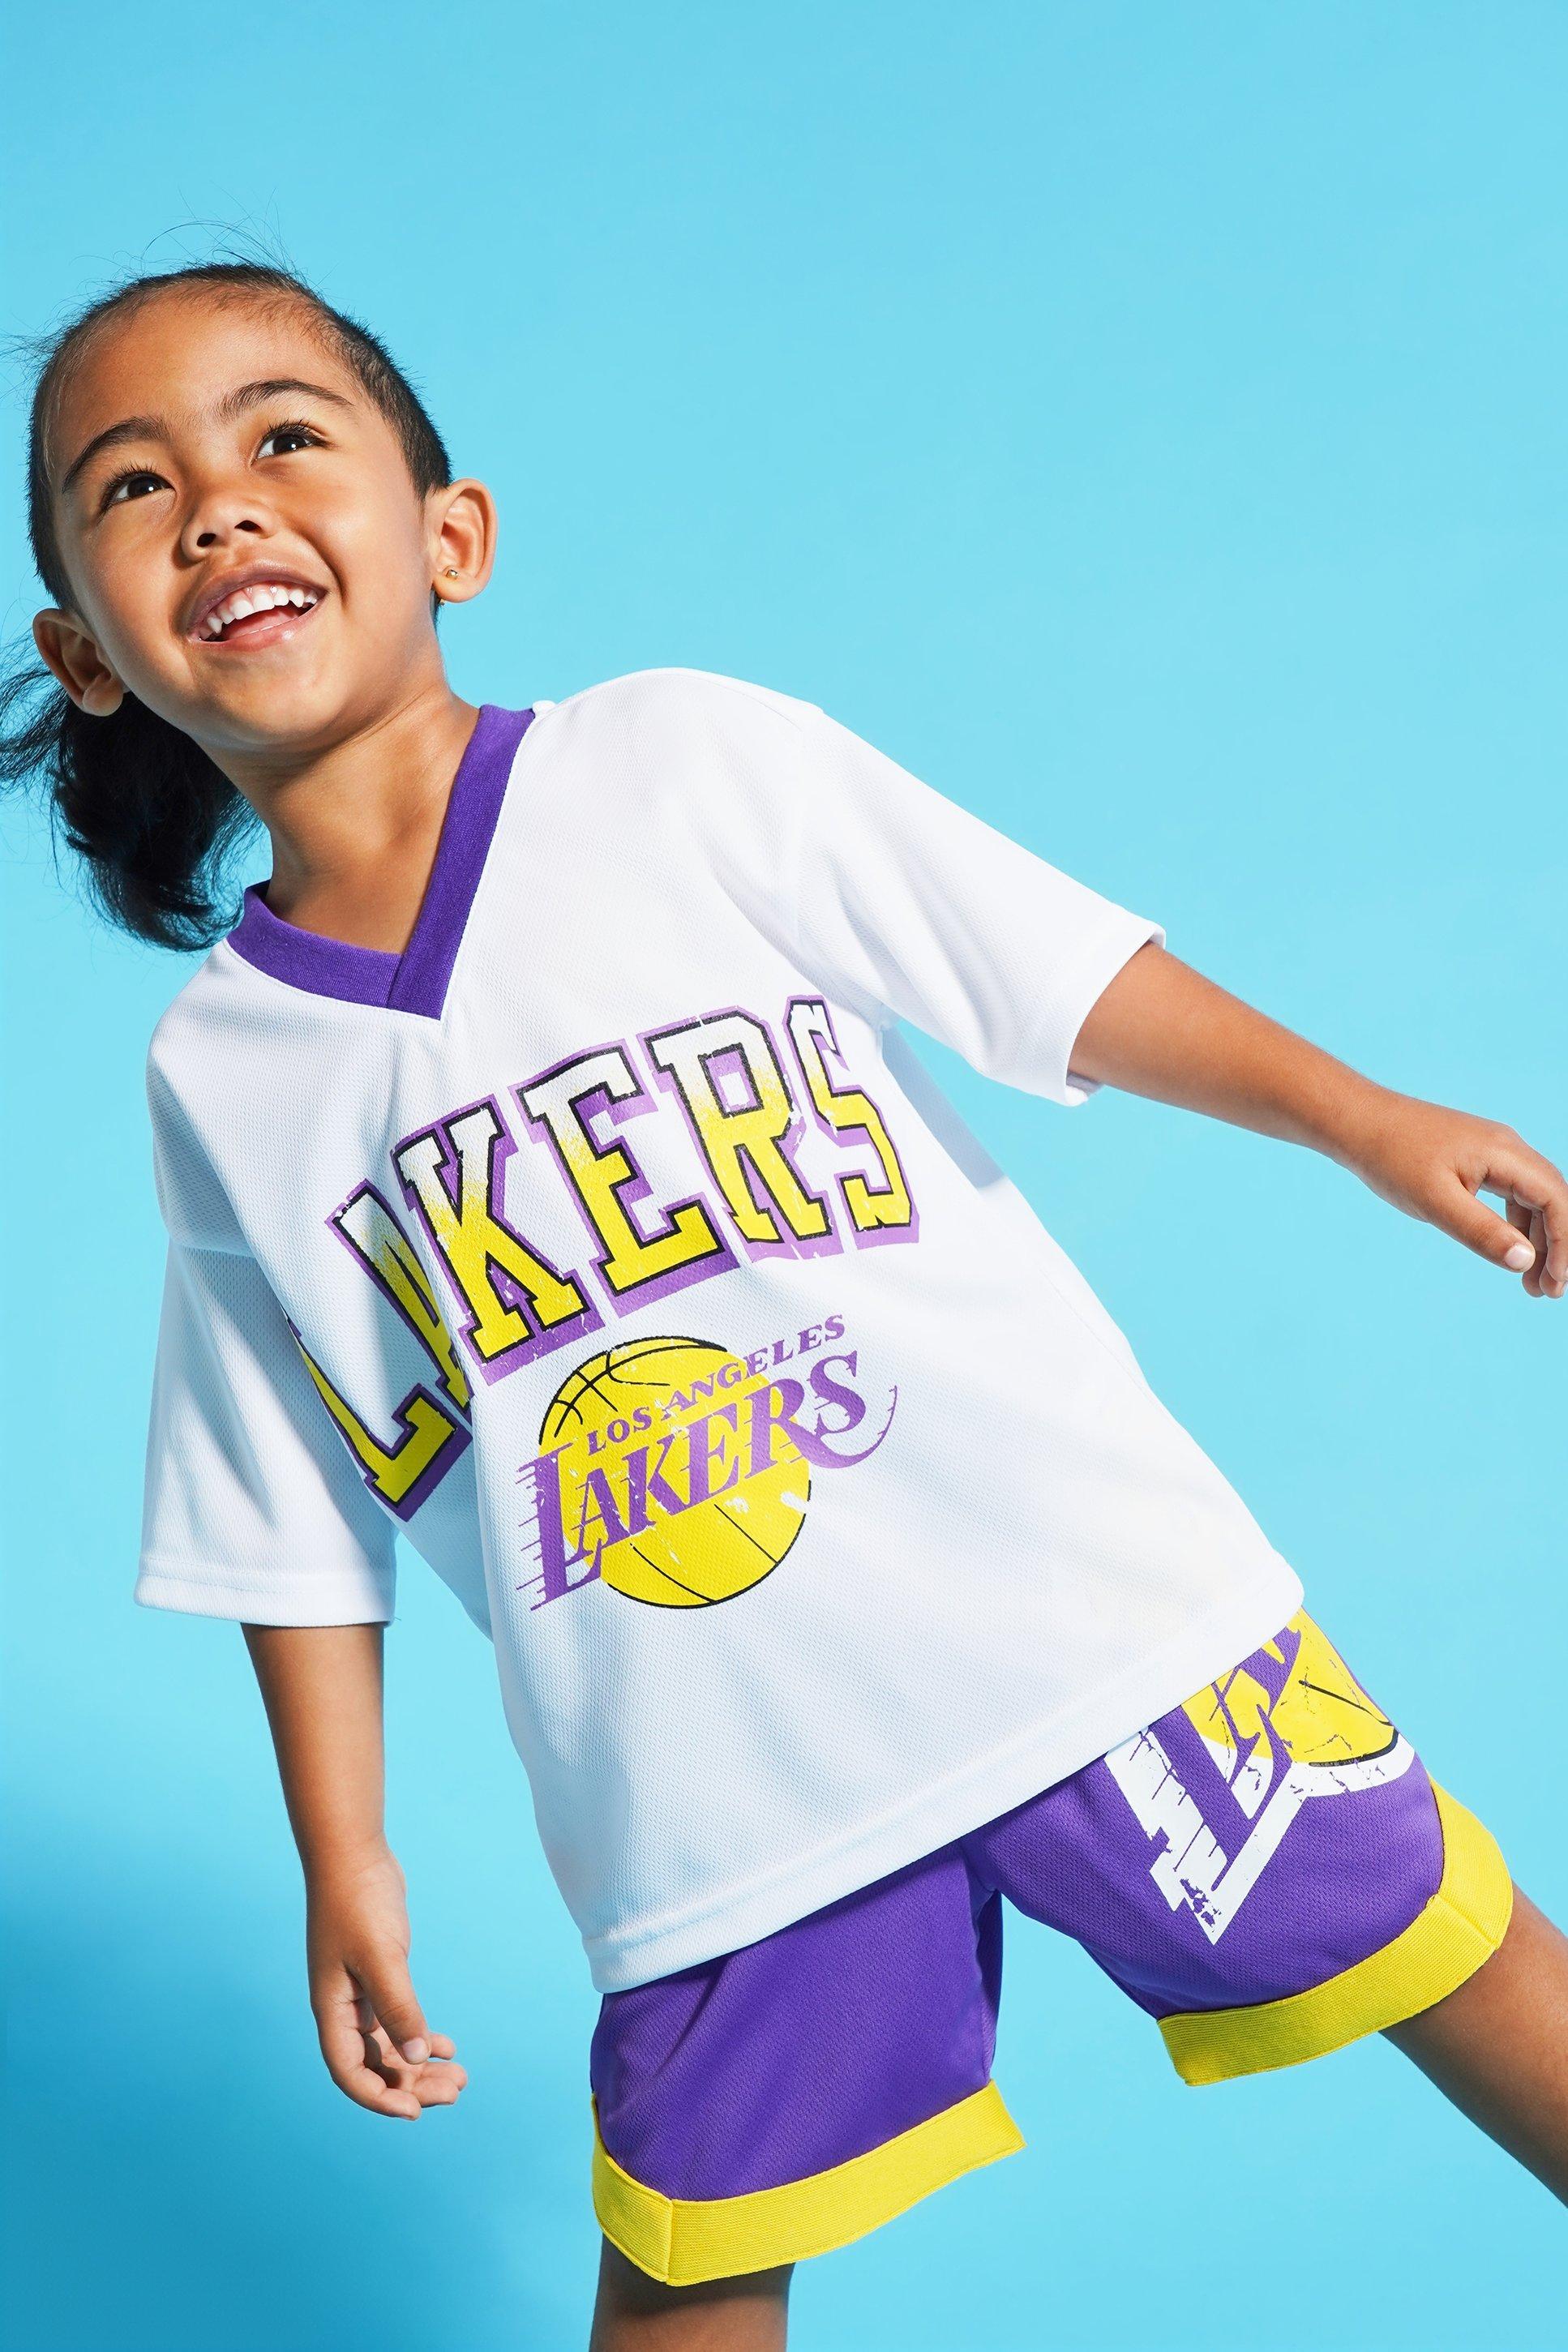 Los Angeles Lakers Baby Clothing, Lakers Infant Jerseys, Toddler Apparel